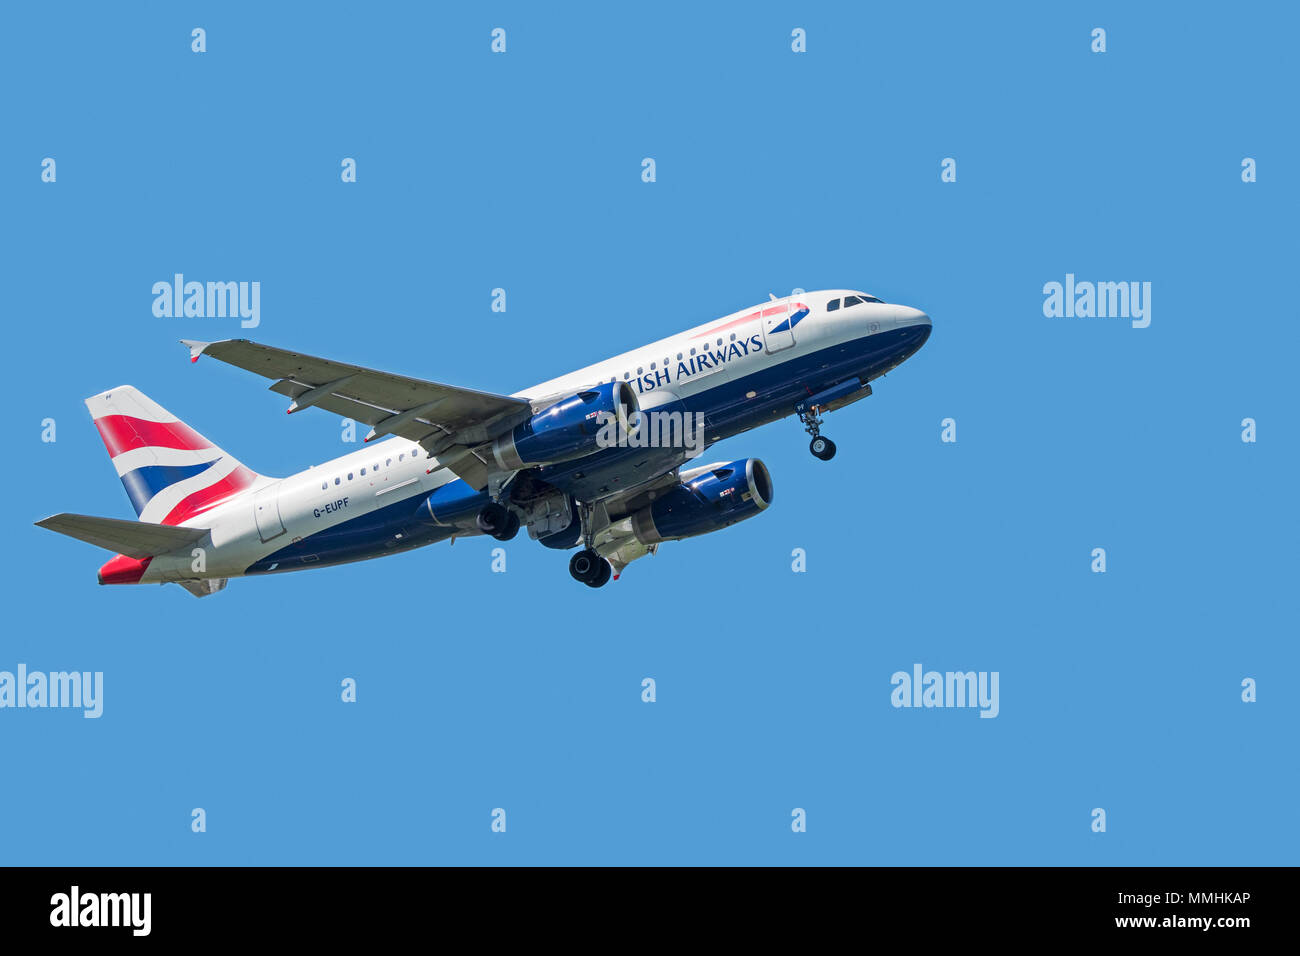 Airbus A319-131, narrow-body, commercial passenger twin-engine jet airliner from British Airways in flight against blue sky Stock Photo